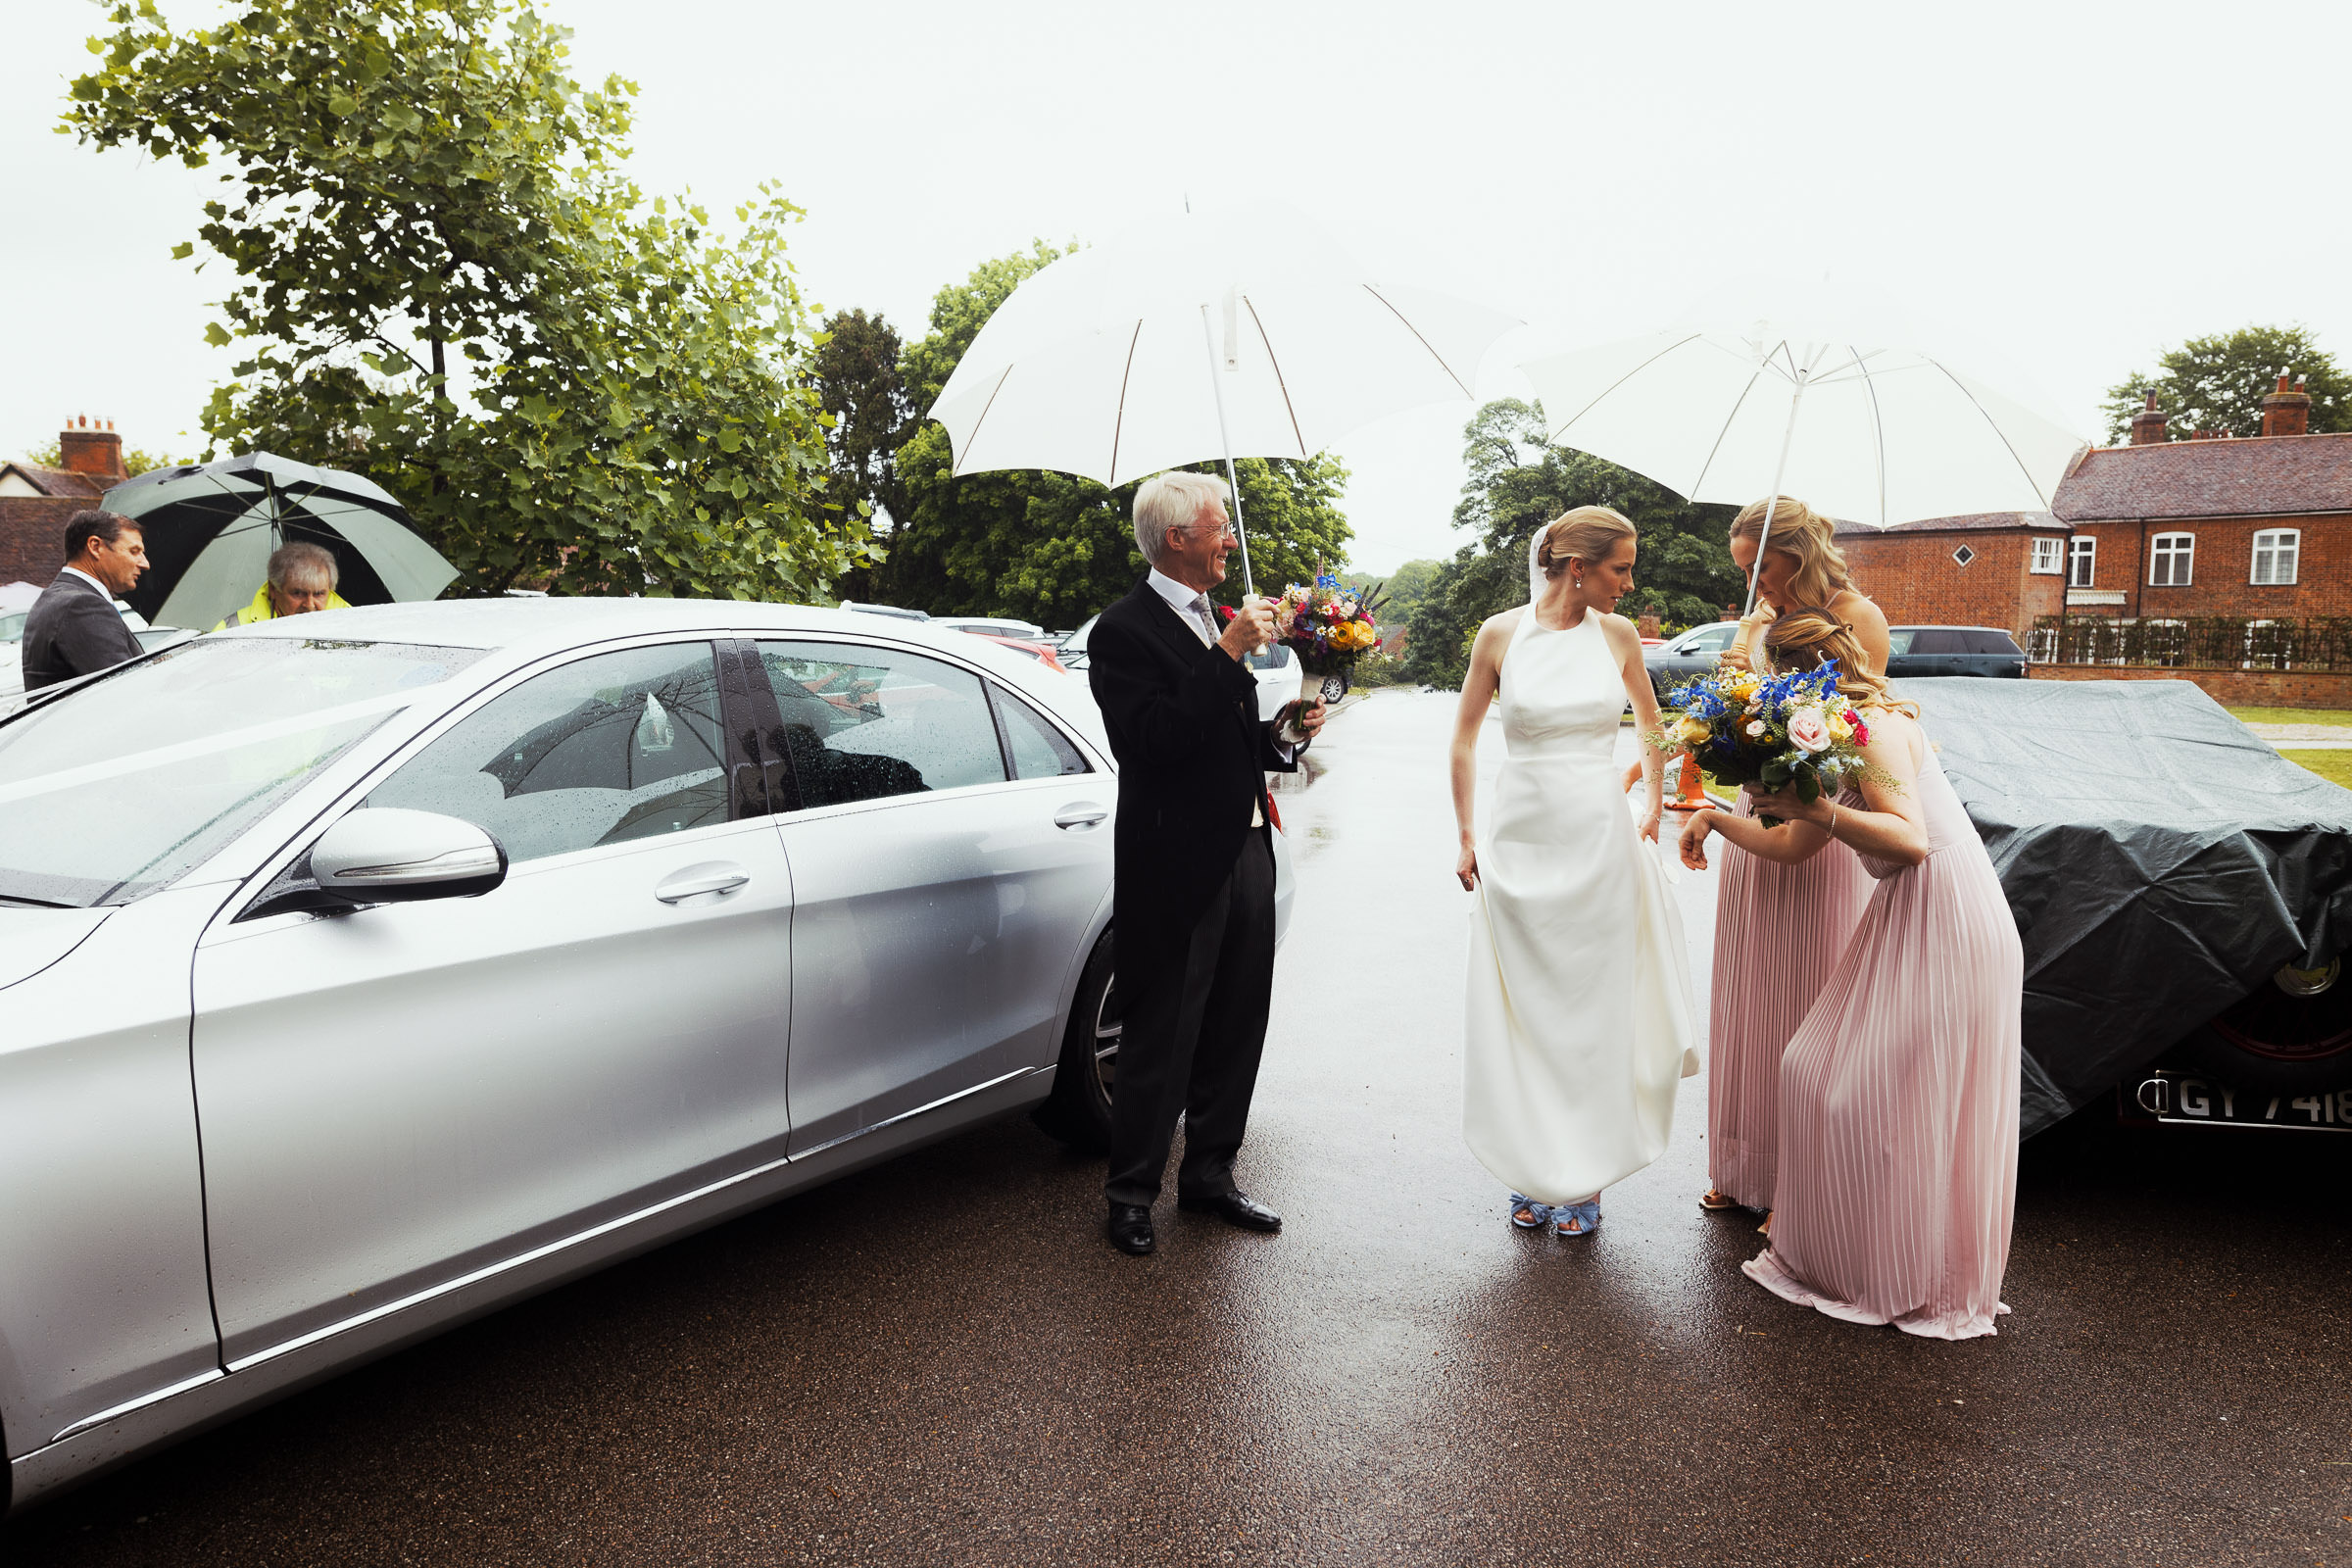 Bride in Jesus Peiro 260 dress from Miss Bush stands outside church in rainy Danbury, Essex. Dad and bridesmaid hold umbrella. Captured by documentary-style Essex wedding photographer from South Woodham Ferrers.